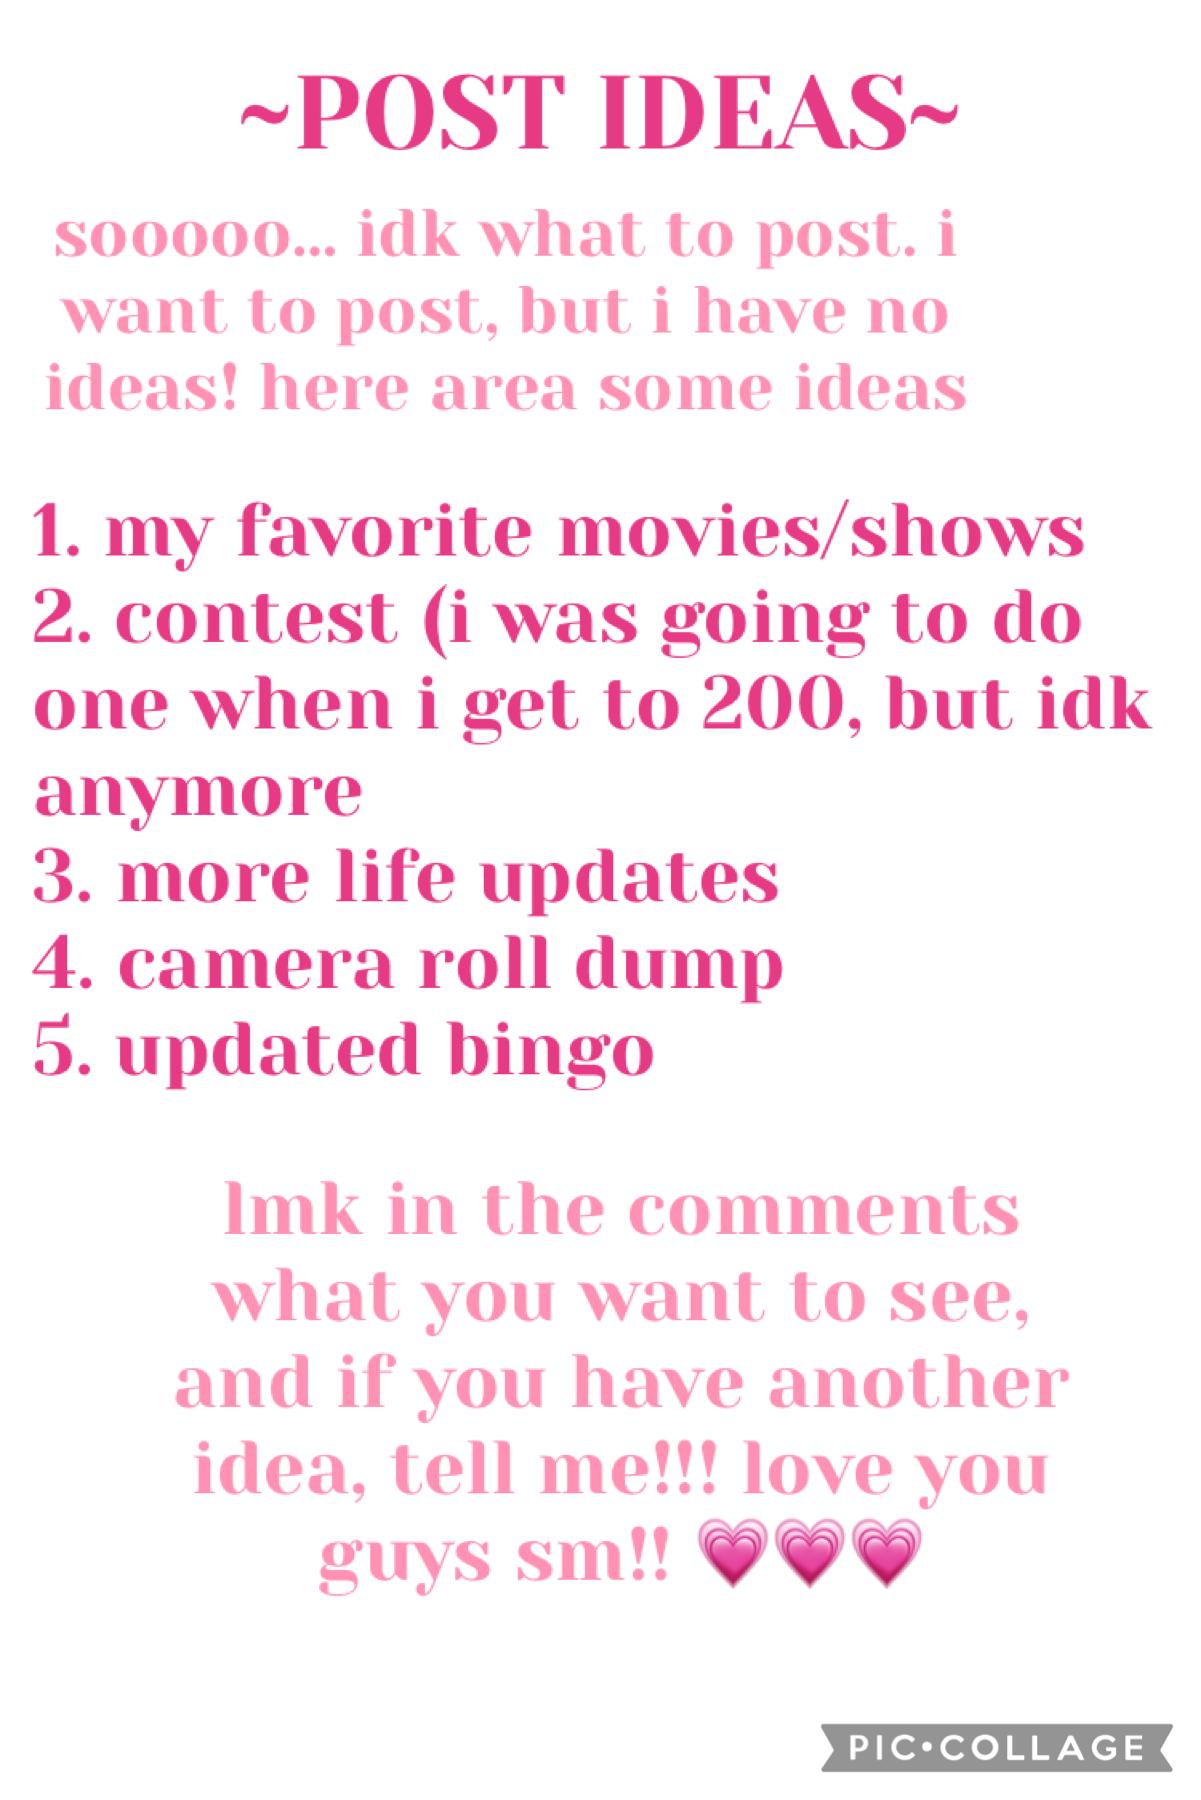 post ideas!! lmk in the comments! ily 💗✨